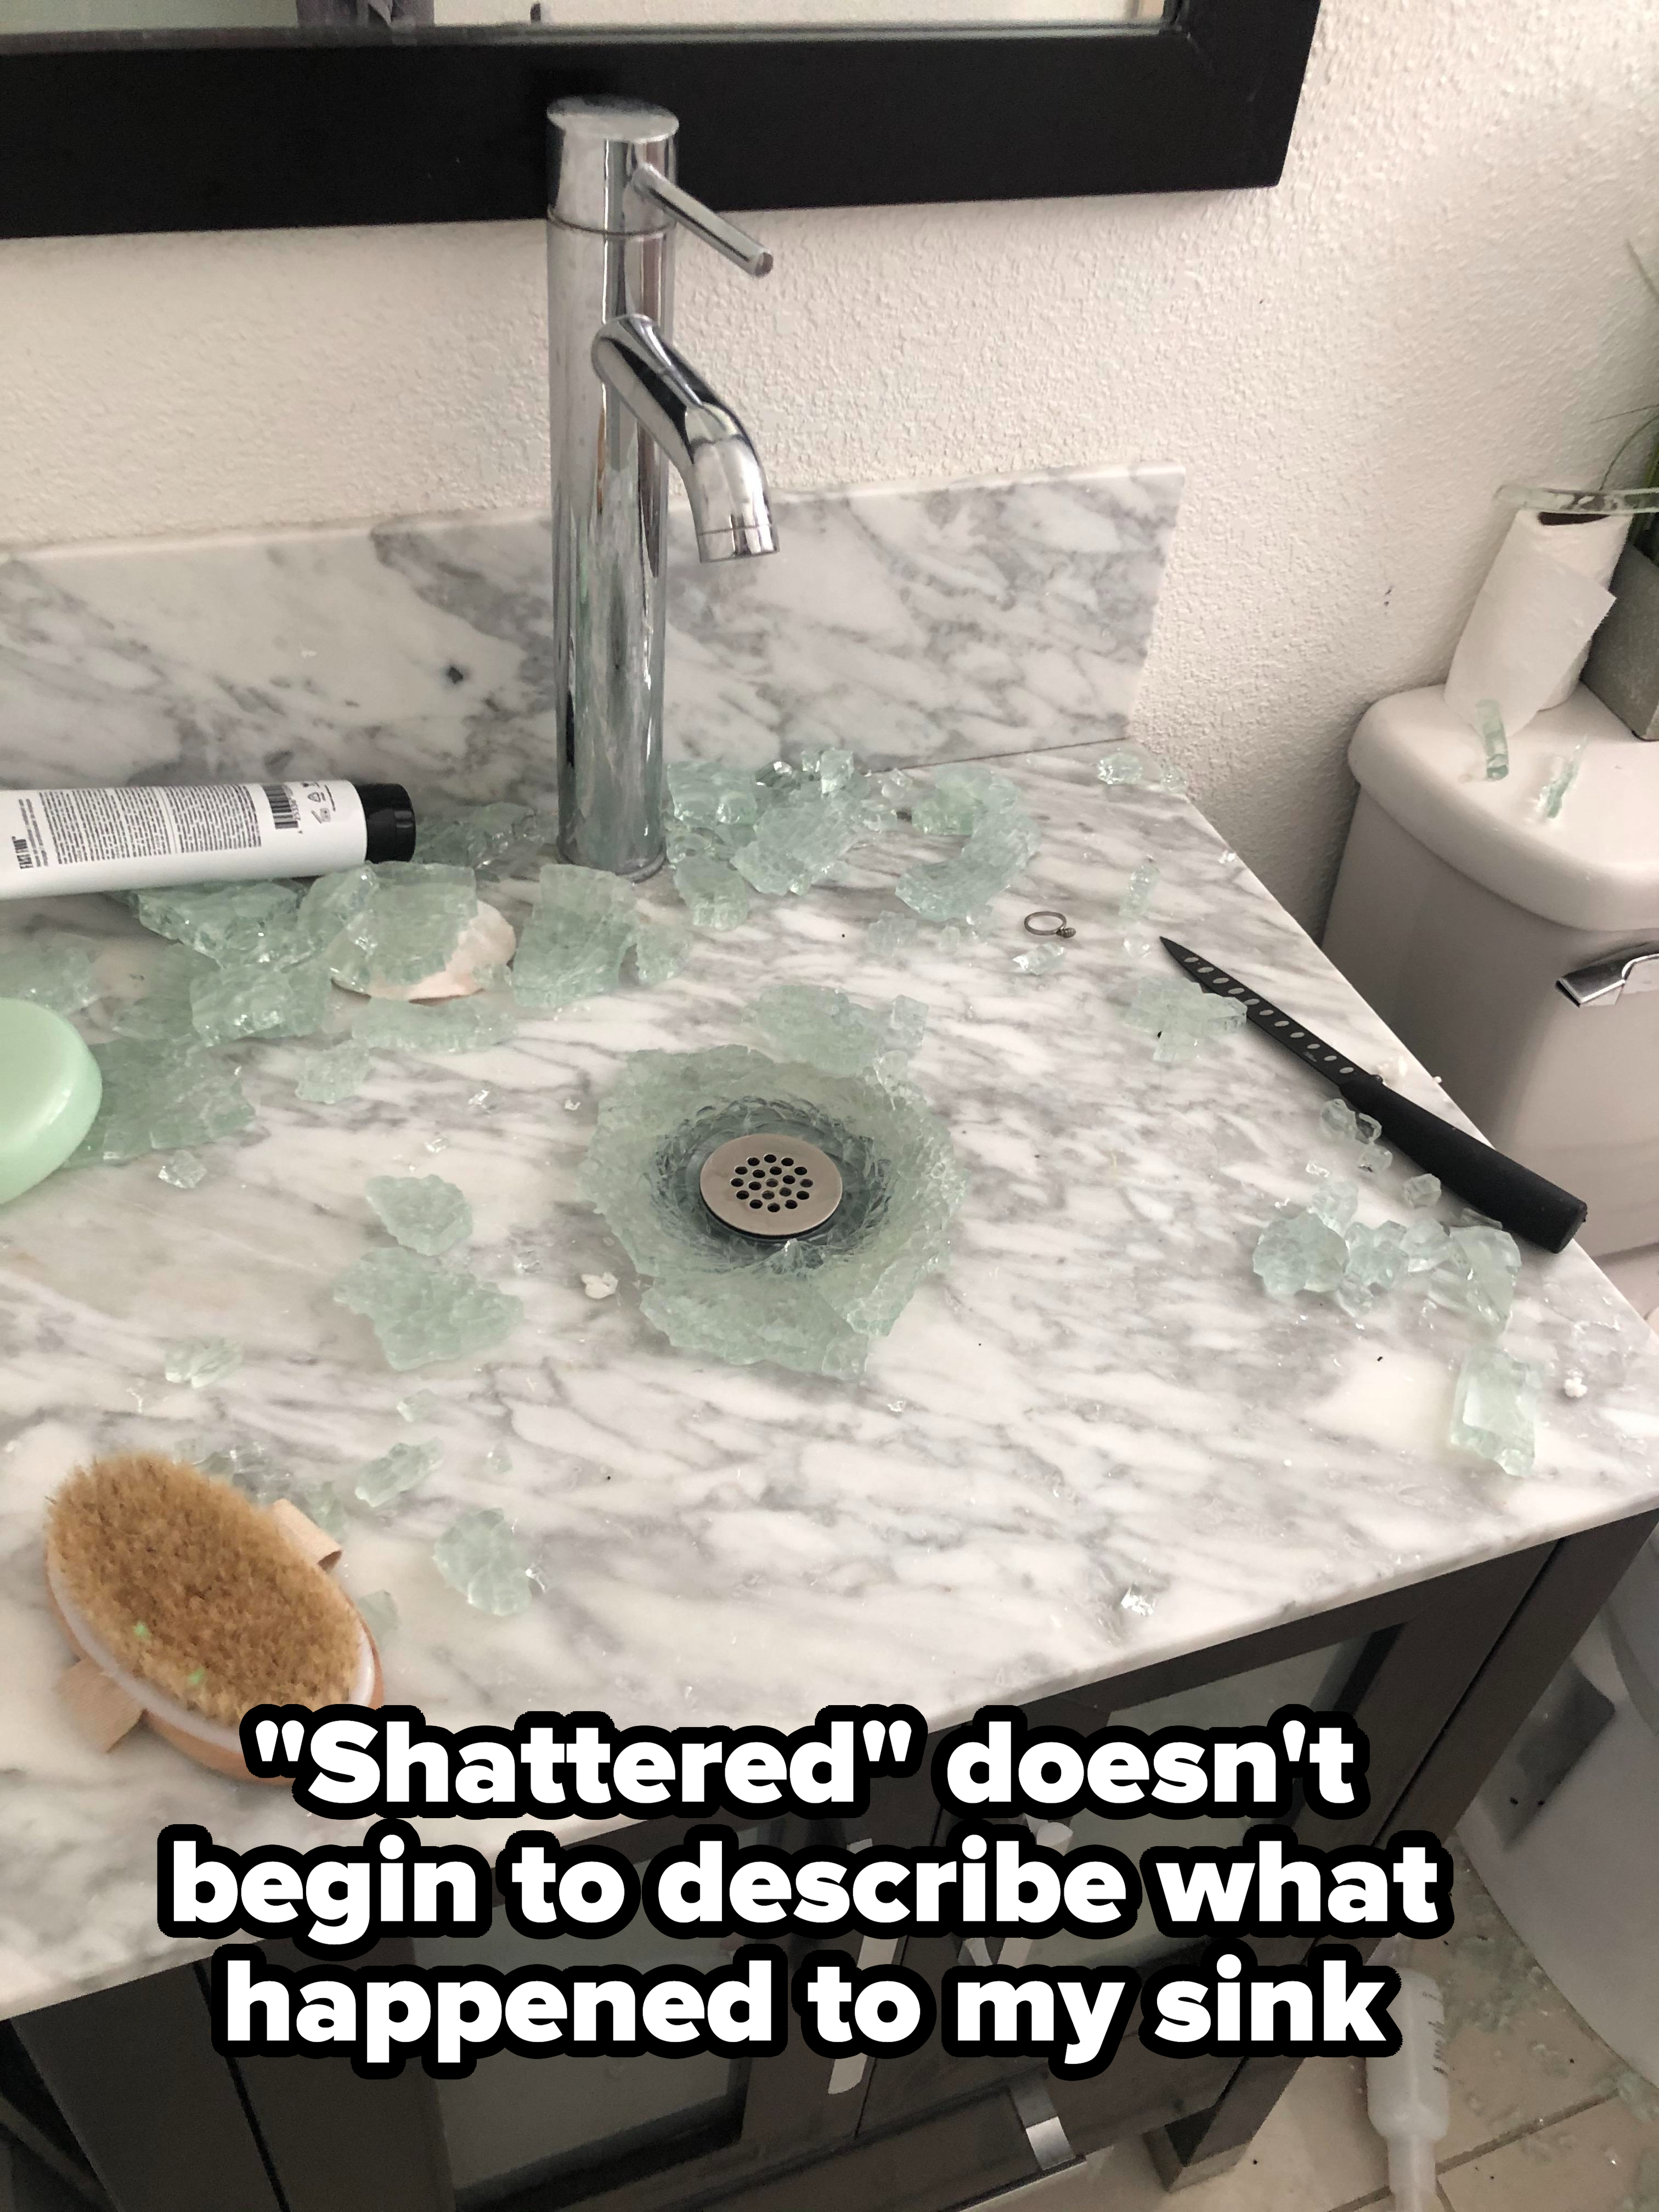 A sink with shattered glass all over it: &quot;&#x27;Shattered&#x27; doesn&#x27;t begin to describe what happened to my sink&quot;